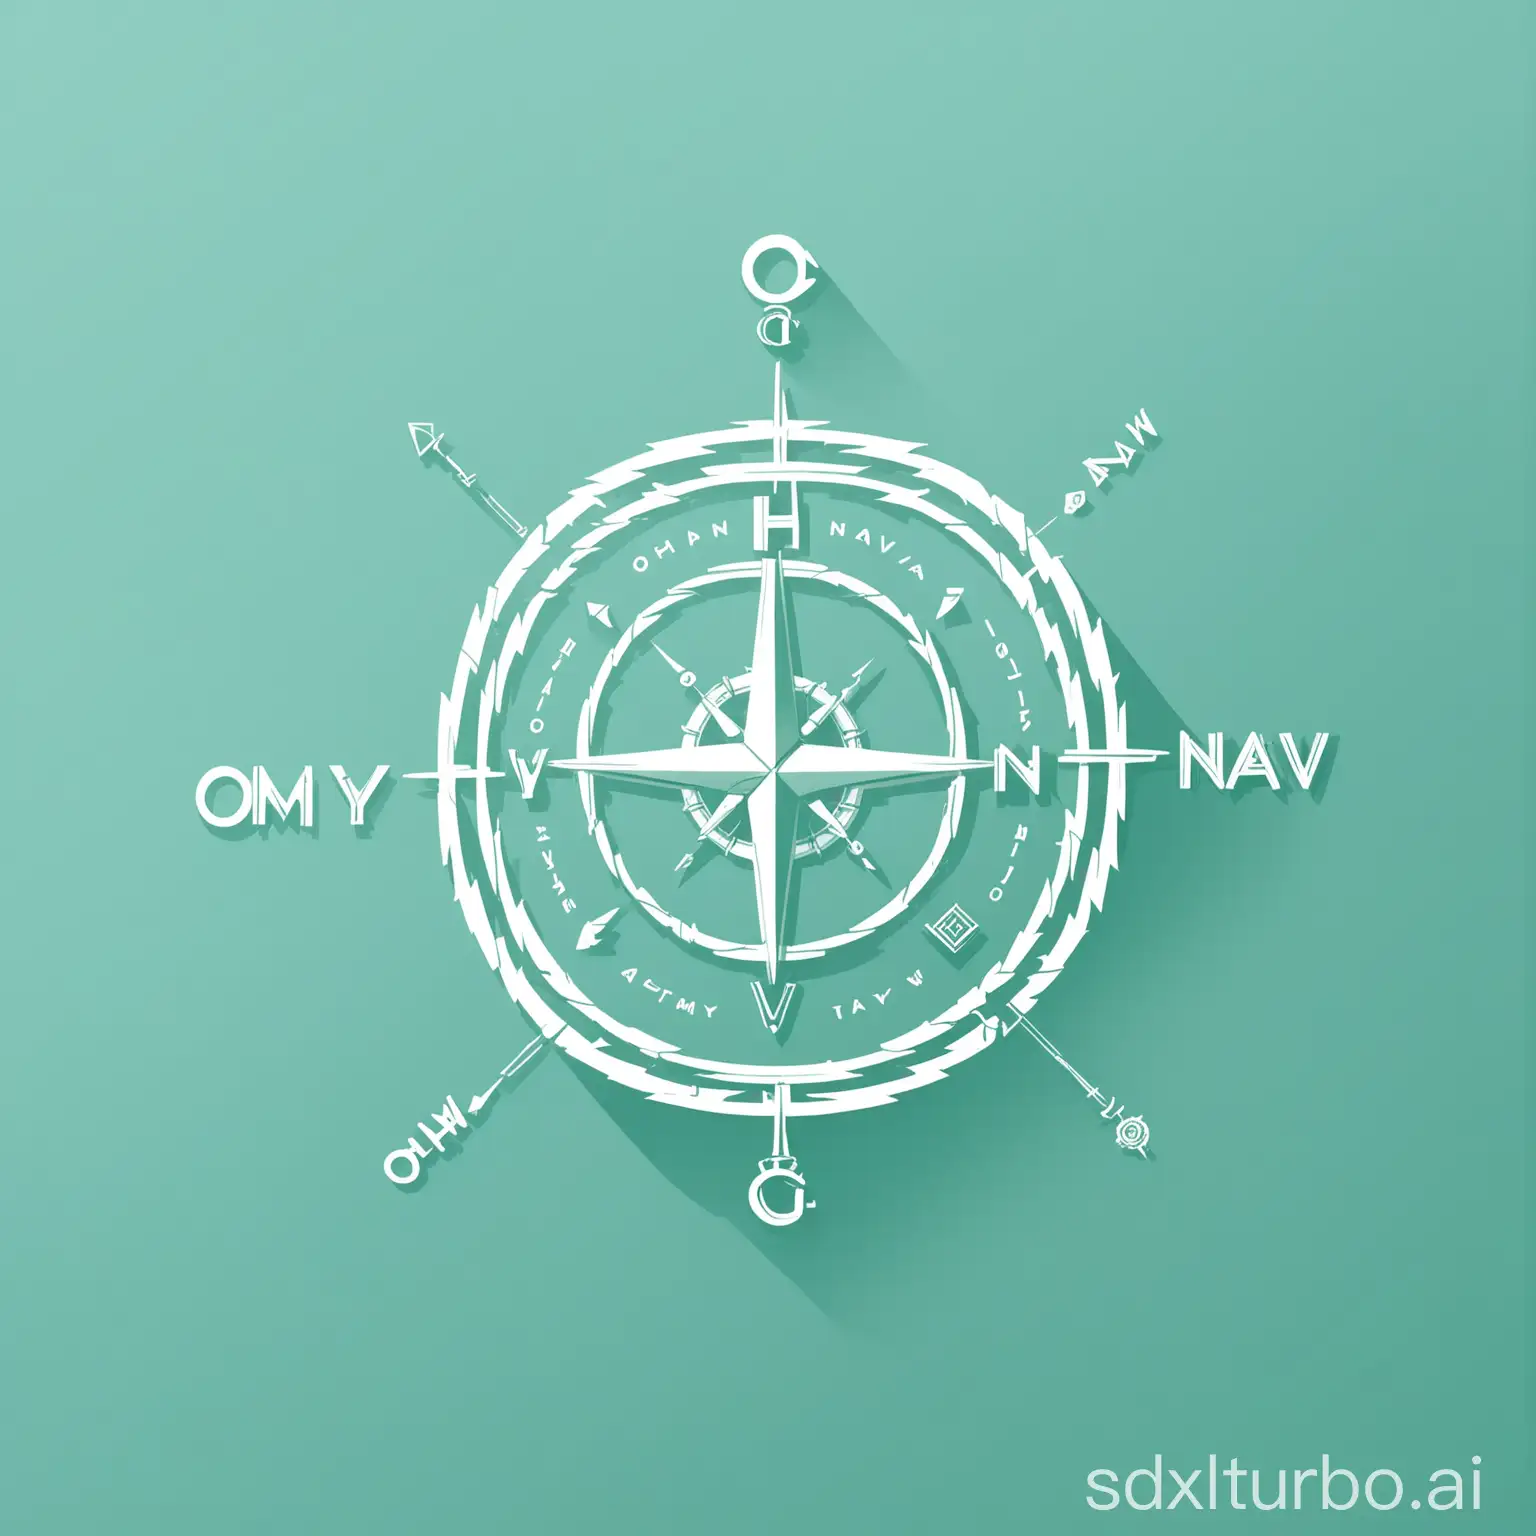 Create a minimalist and flat design logo for a website aggregator named 'ohmynav'. The design should embody the concept of navigation and discovery in a digital space. Key elements to include are:  A simple, yet modern typeface for the text 'ohmynav'. The letter 'o' in 'ohmynav' could be creatively replaced with or combined with a symbol that represents a compass or a globe to emphasize the navigation aspect. Use a clean, uncluttered layout with a limited color palette. Suggest using a bold color for the symbol and a contrasting, yet harmonious color for the text. Incorporate subtle design cues that hint at a network of interconnected sites, possibly through the use of thin, interconnected lines around the symbol or within the background. The overall design should feel lightweight and friendly, with a touch of sophistication to appeal to tech-savvy users. Ensure that the logo is scalable and maintains its integrity at various sizes, from small favicon dimensions to larger display on the website. 